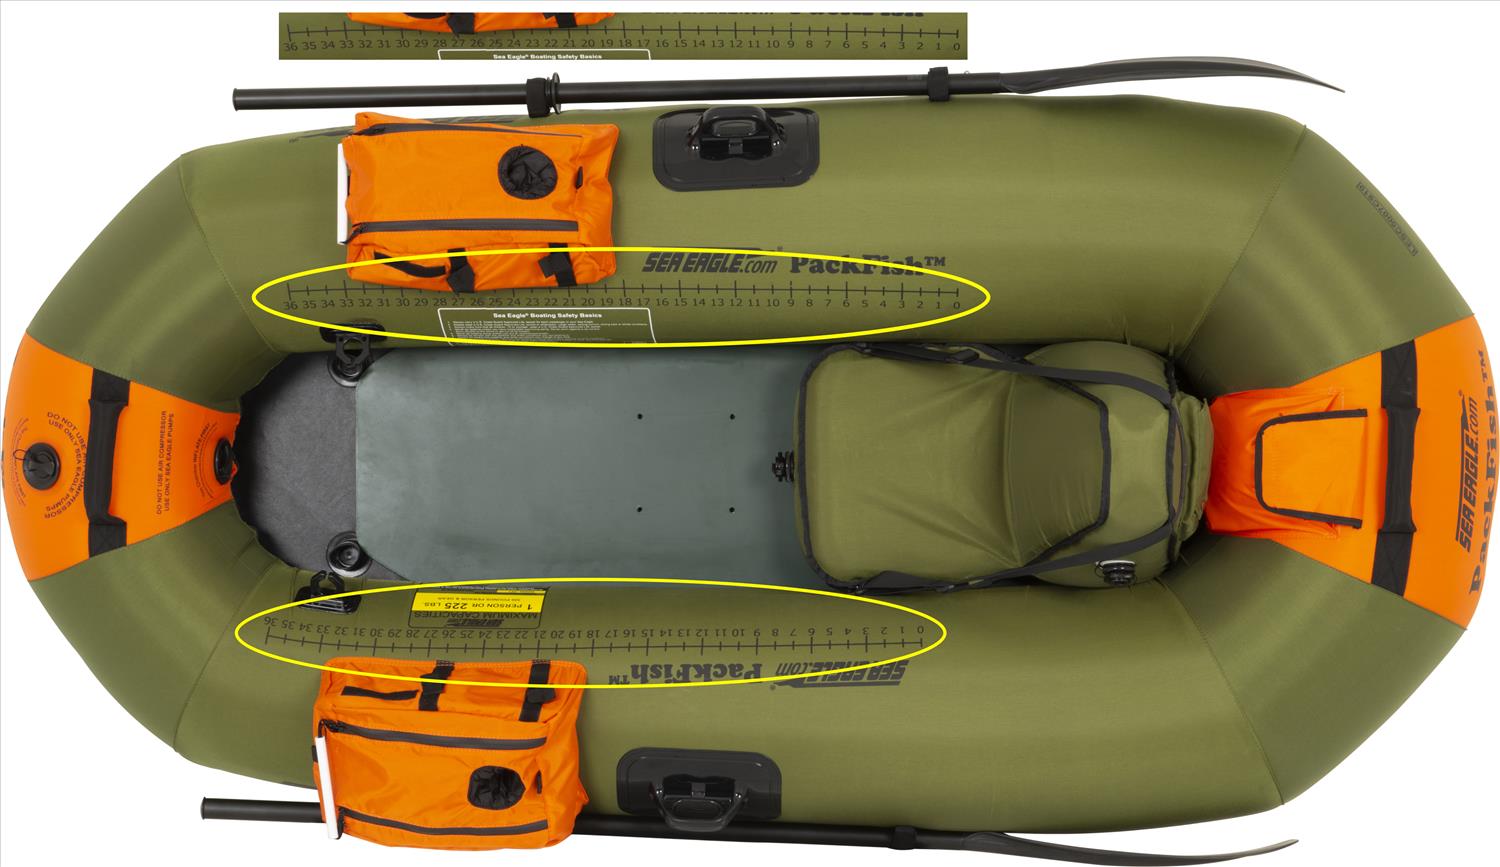 Sea Eagle FSK16 3 person Inflatable Fishing Boat. Package Prices